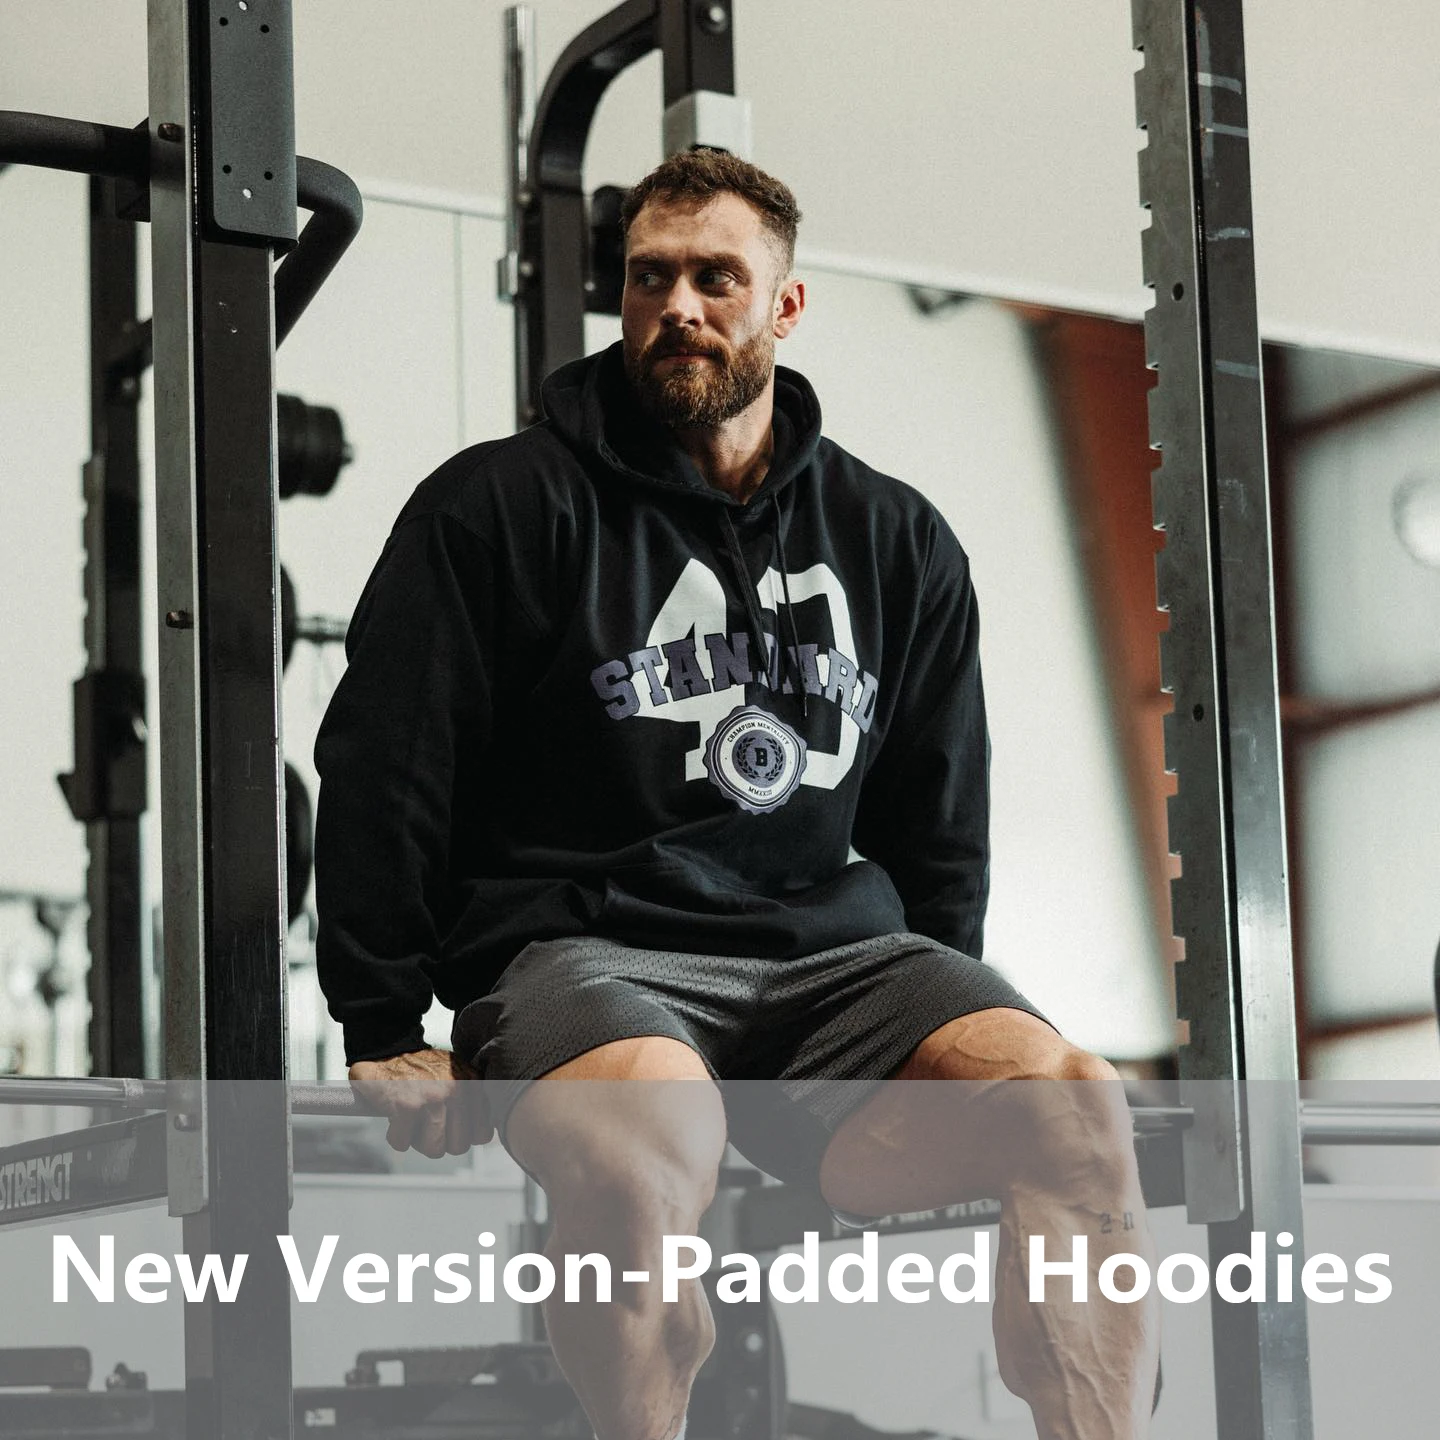 Cbum Oversized Hoddies Bodybuilding Workout High Quality Men Clothing Fitness Crossfit US Size New In Hoodies & Sweatshirts